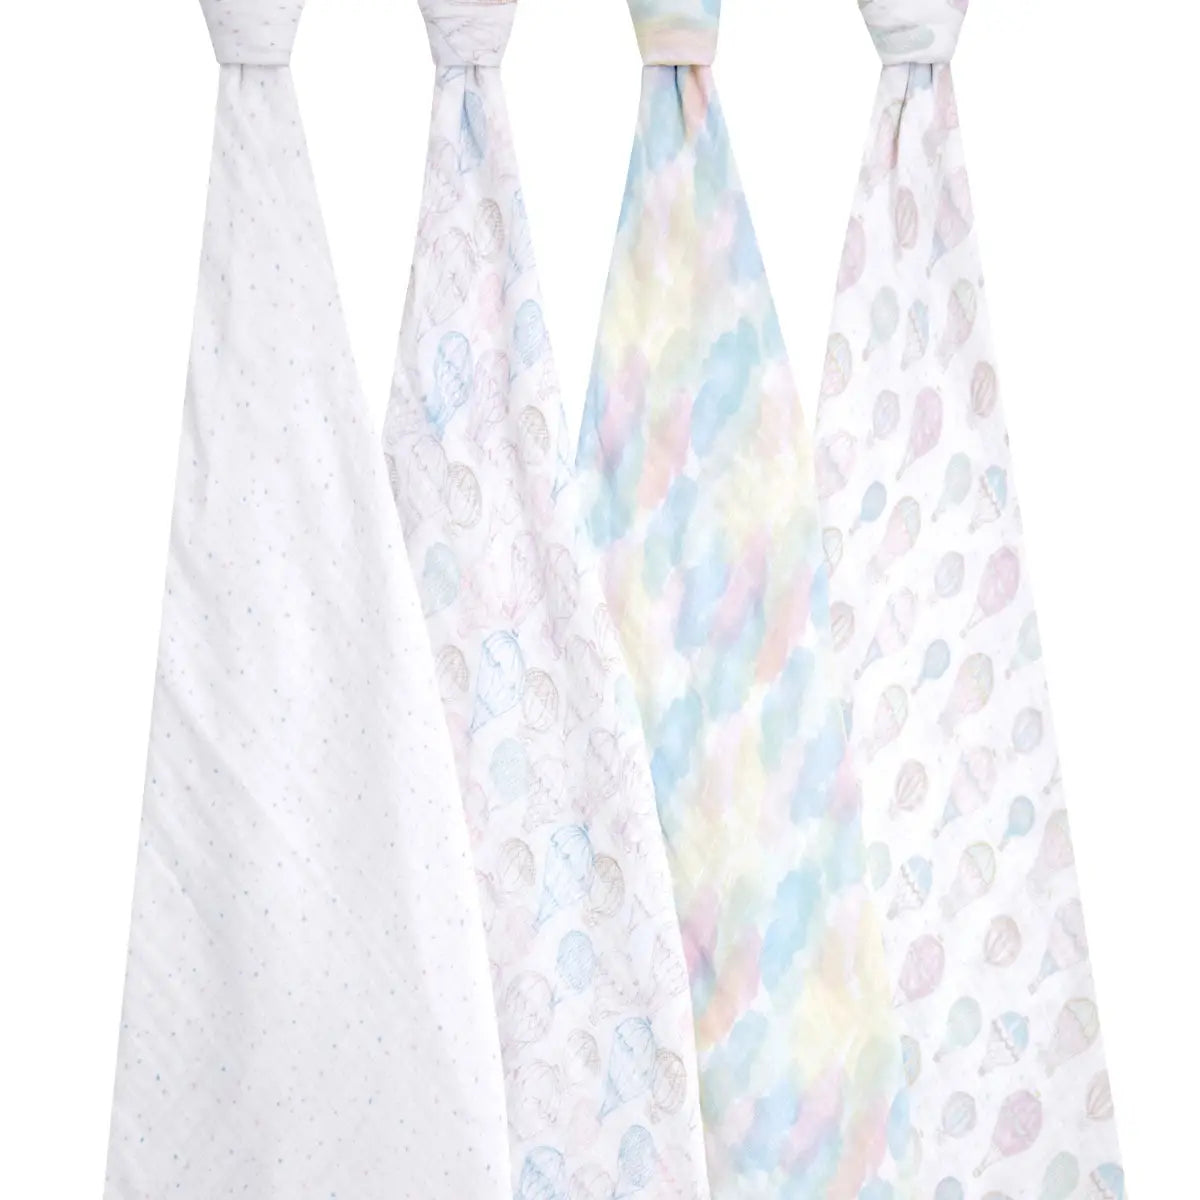 Aden and Anais Organic Swaddles 4 pack